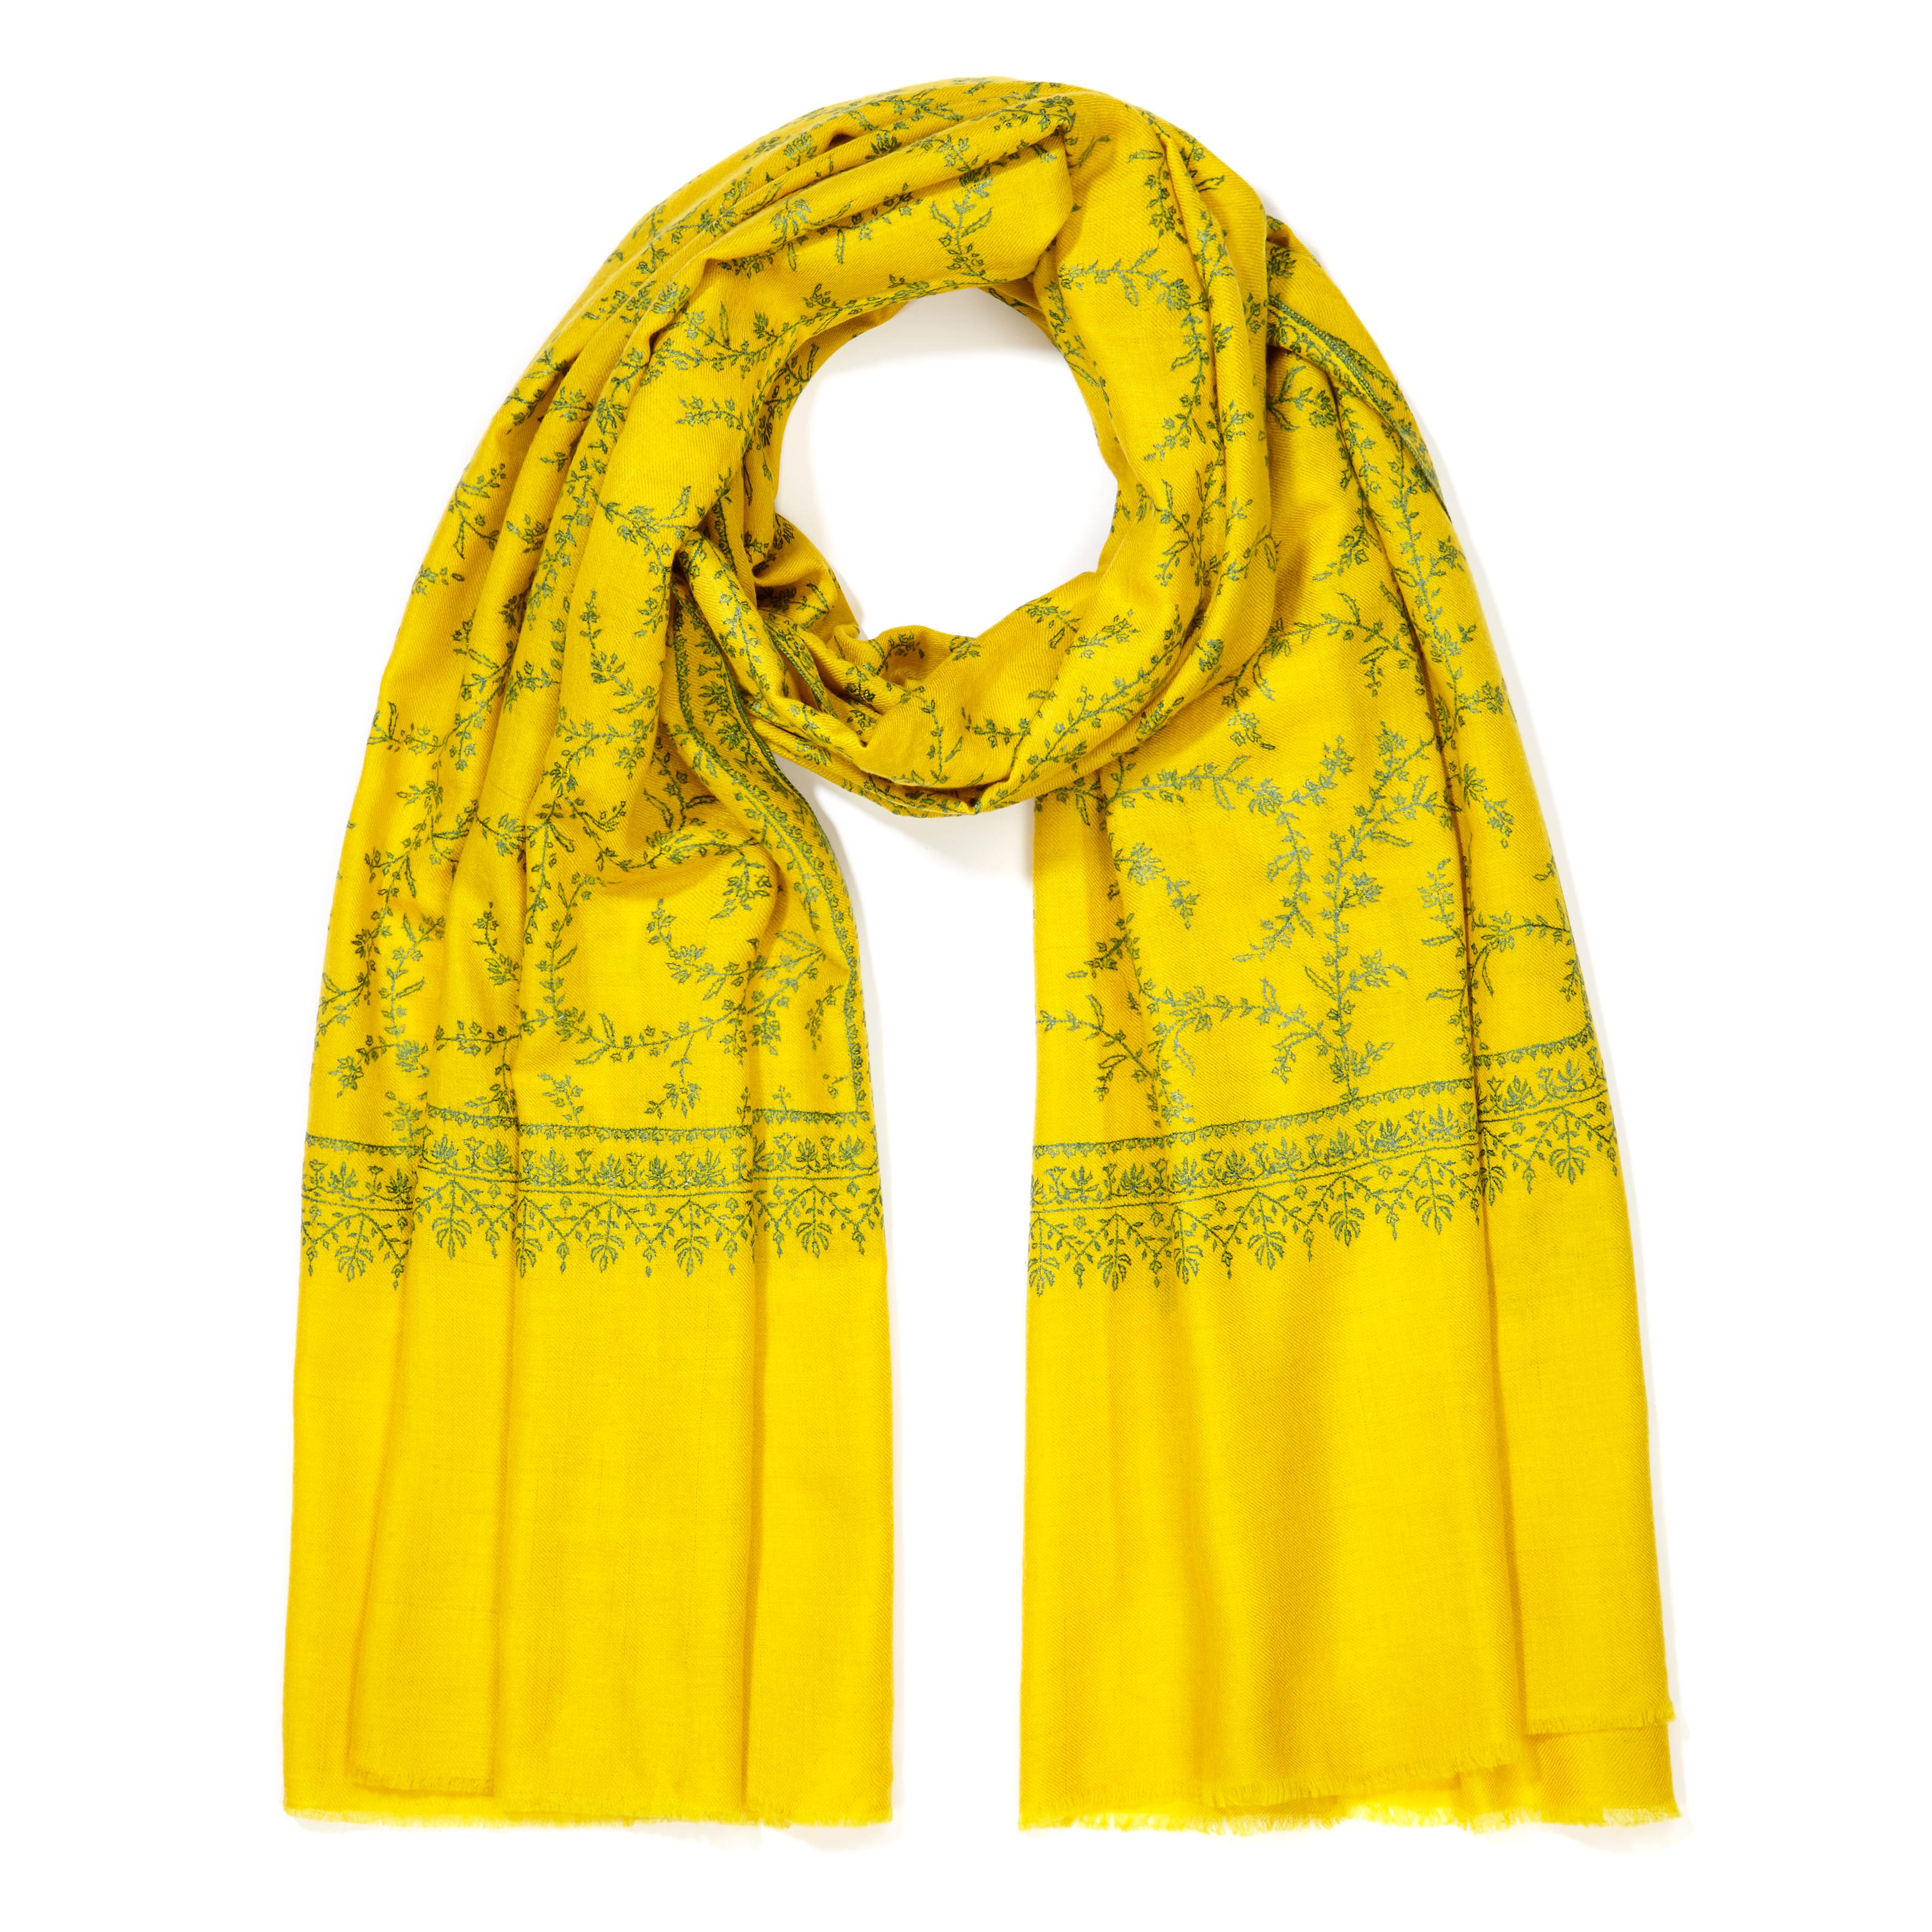 Hand Embroidered 100% Cashmere Scarf in Yellow Made in Kashmir India 

Verheyen London’s shawl is spun from the finest embroidered woven cashmere from Kashmir.  The embroidery can take up to 1 year to embroider and each one is unique. Its warmth